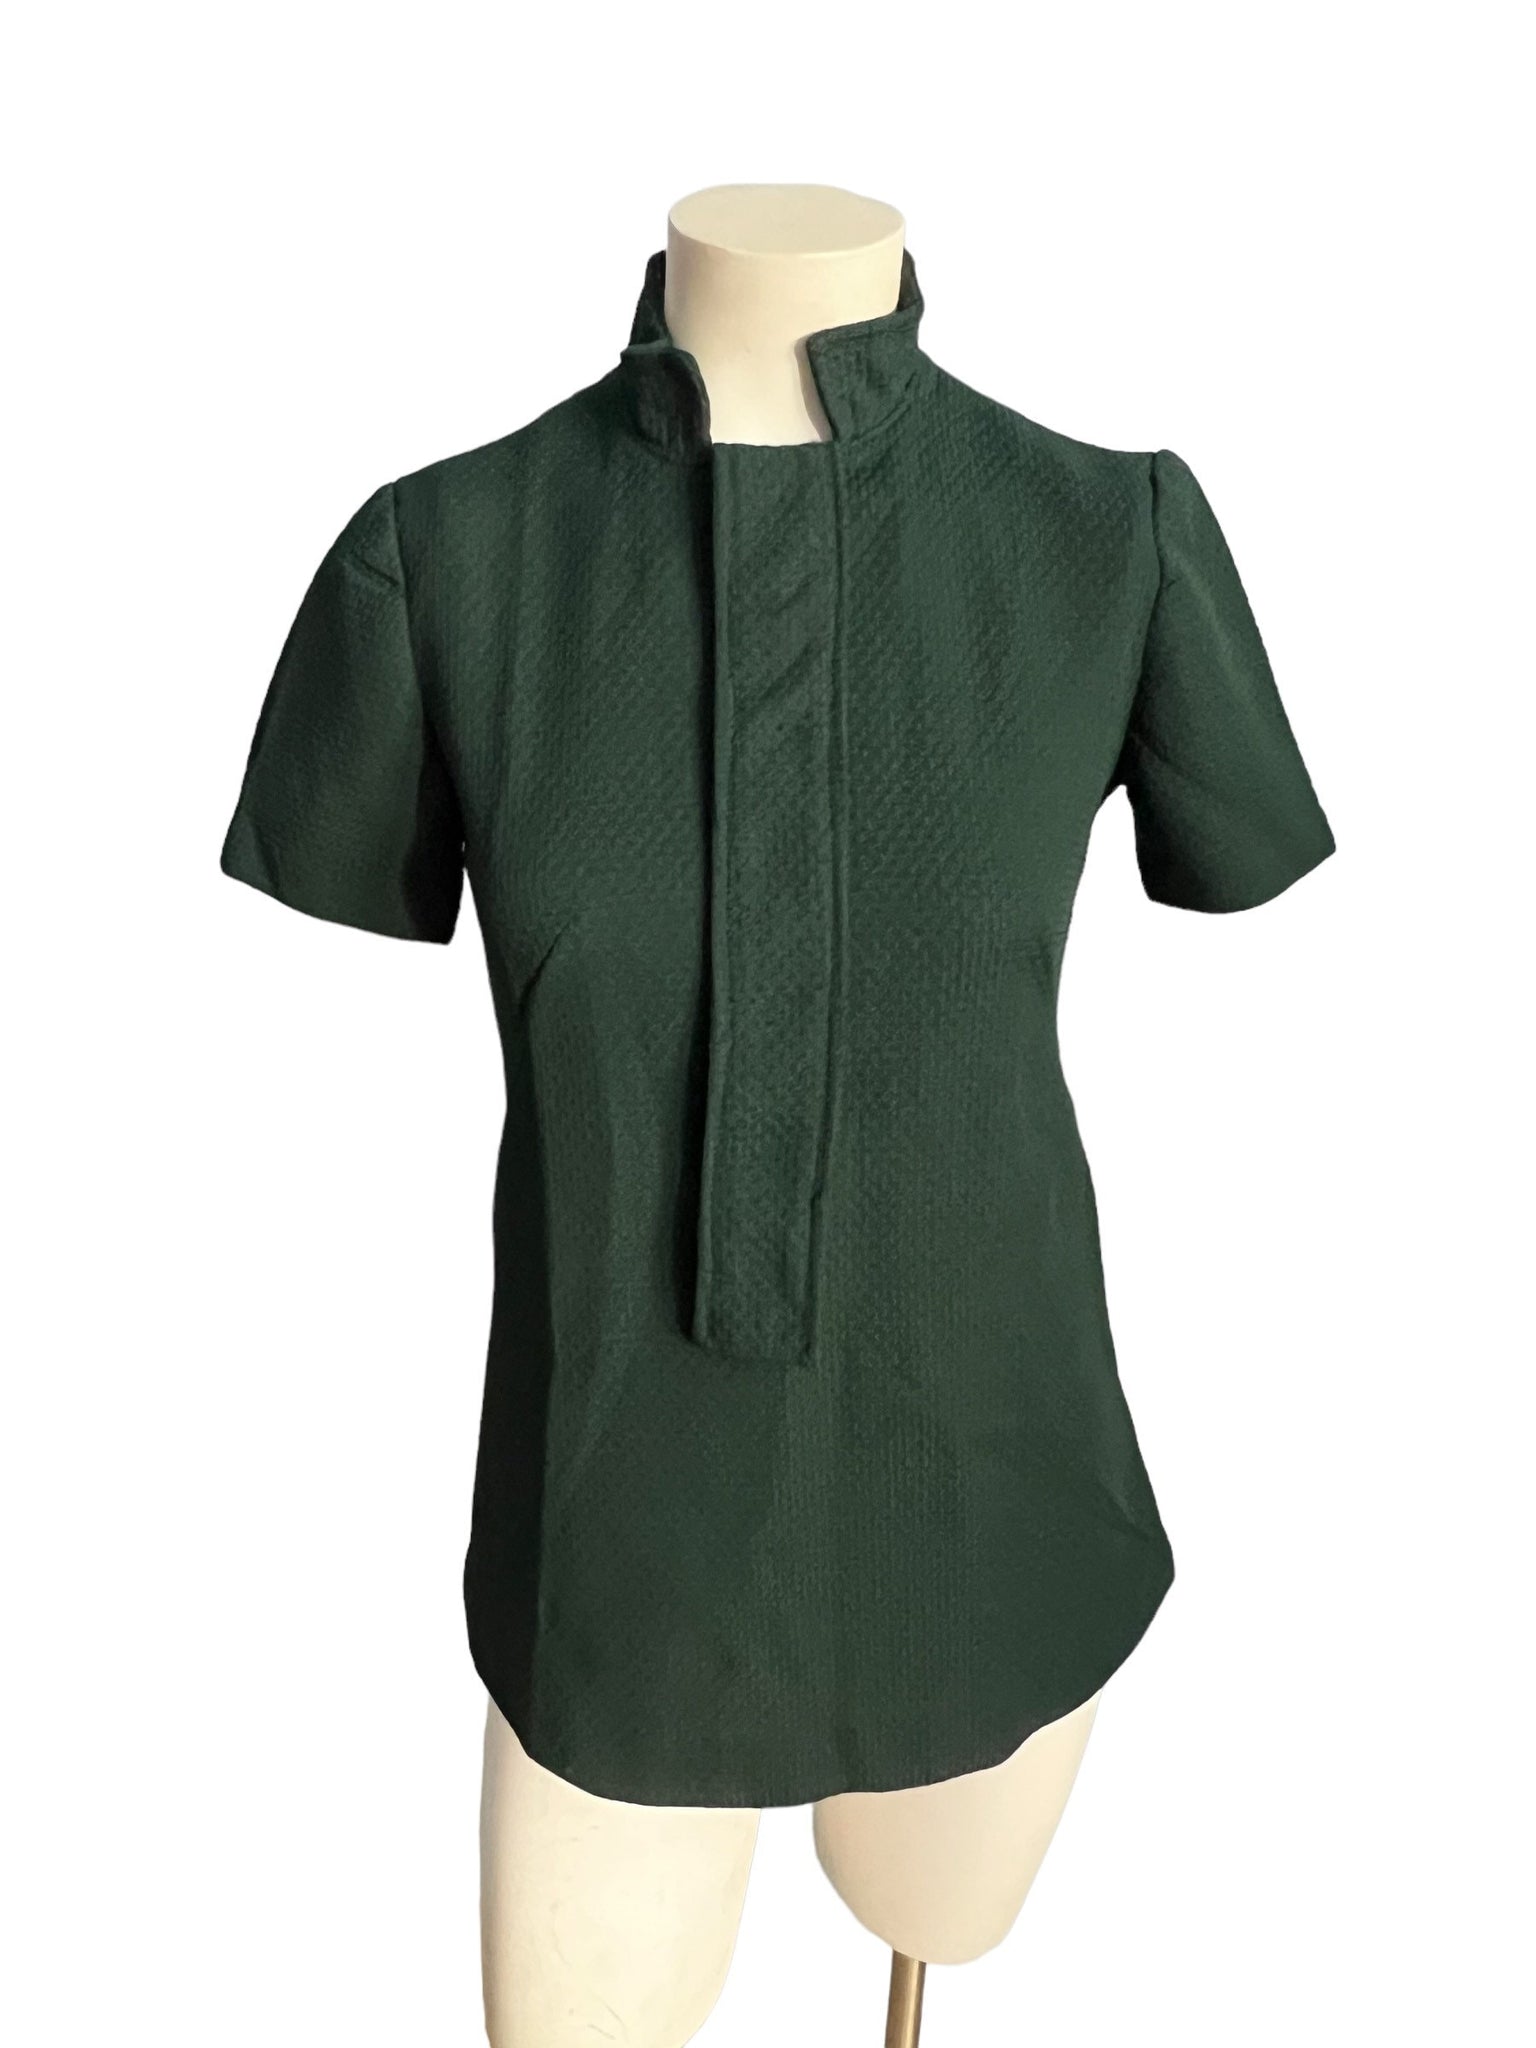 Vintage 70's green tunic top shirt S